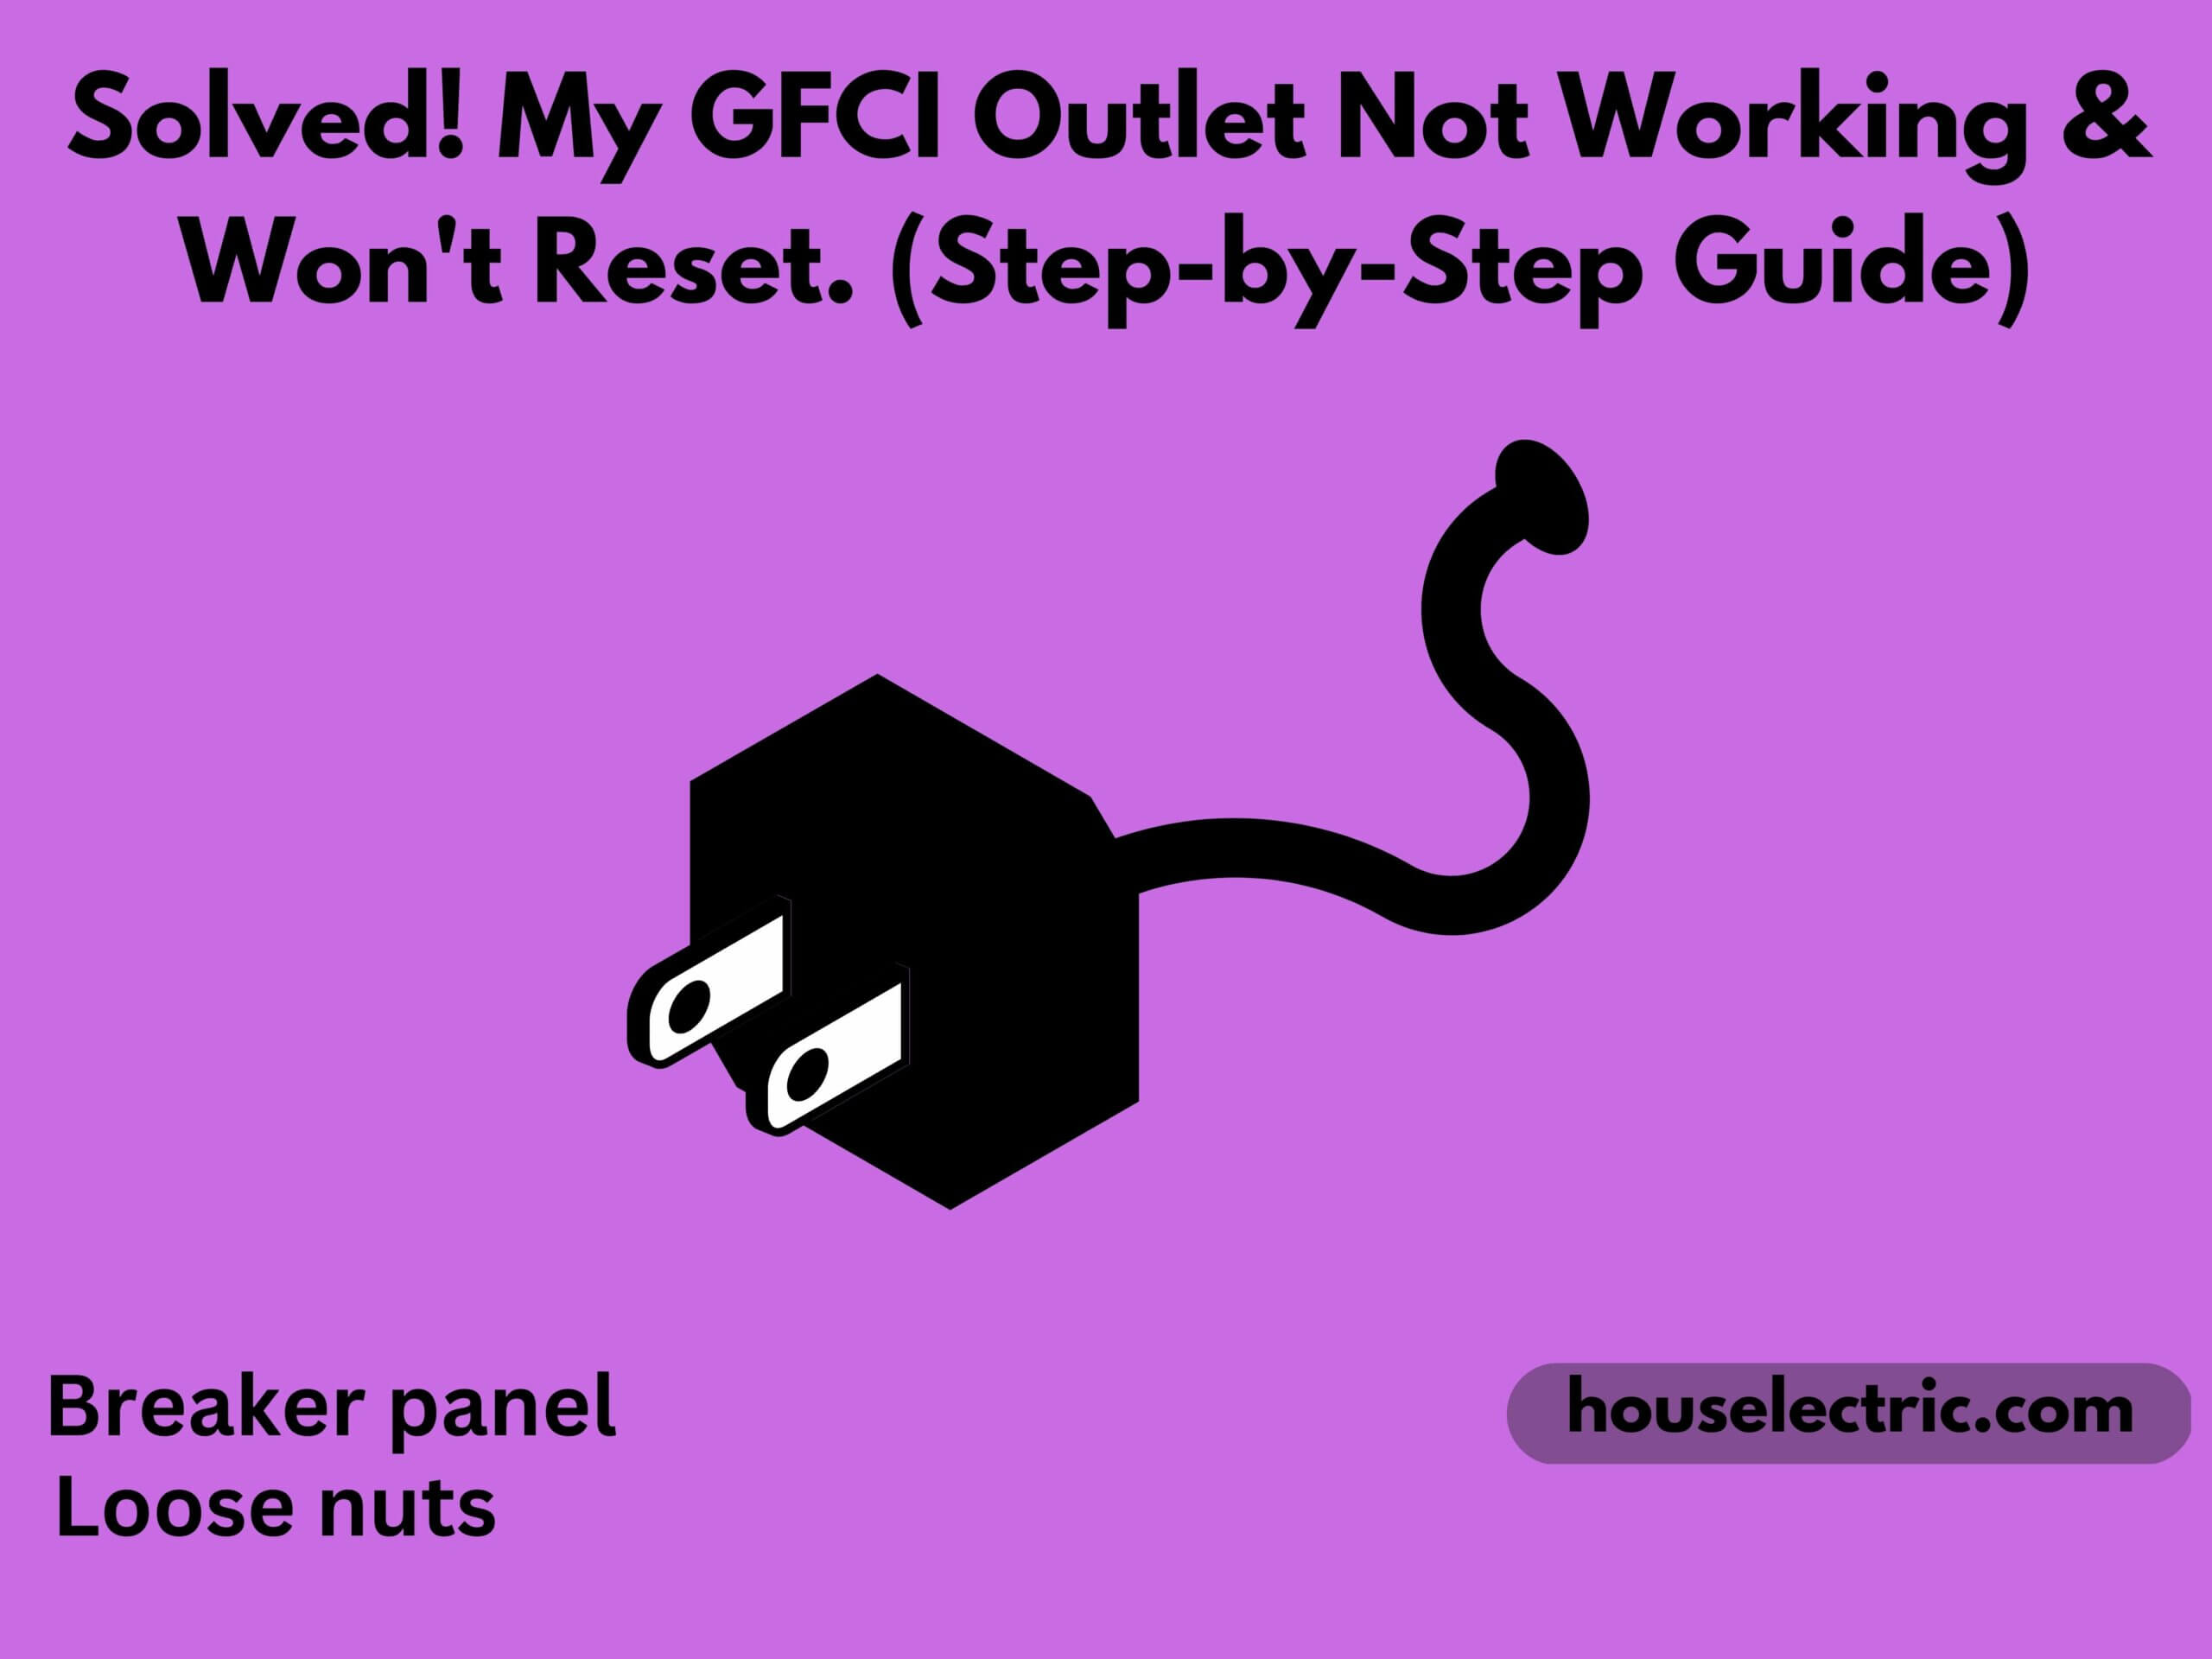 GFCI Outlet Not Working